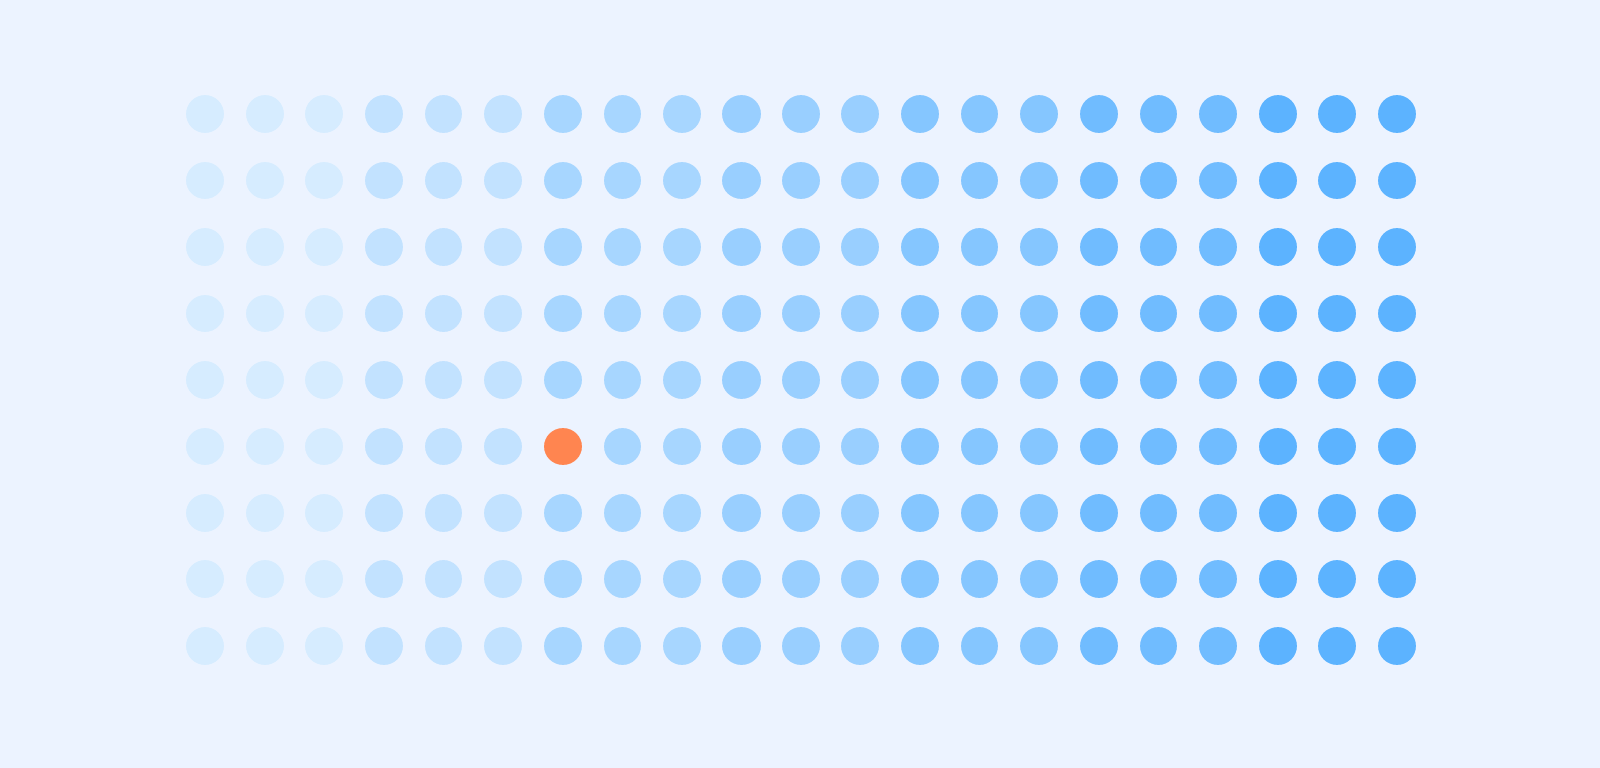 Blue dots with one that is orange